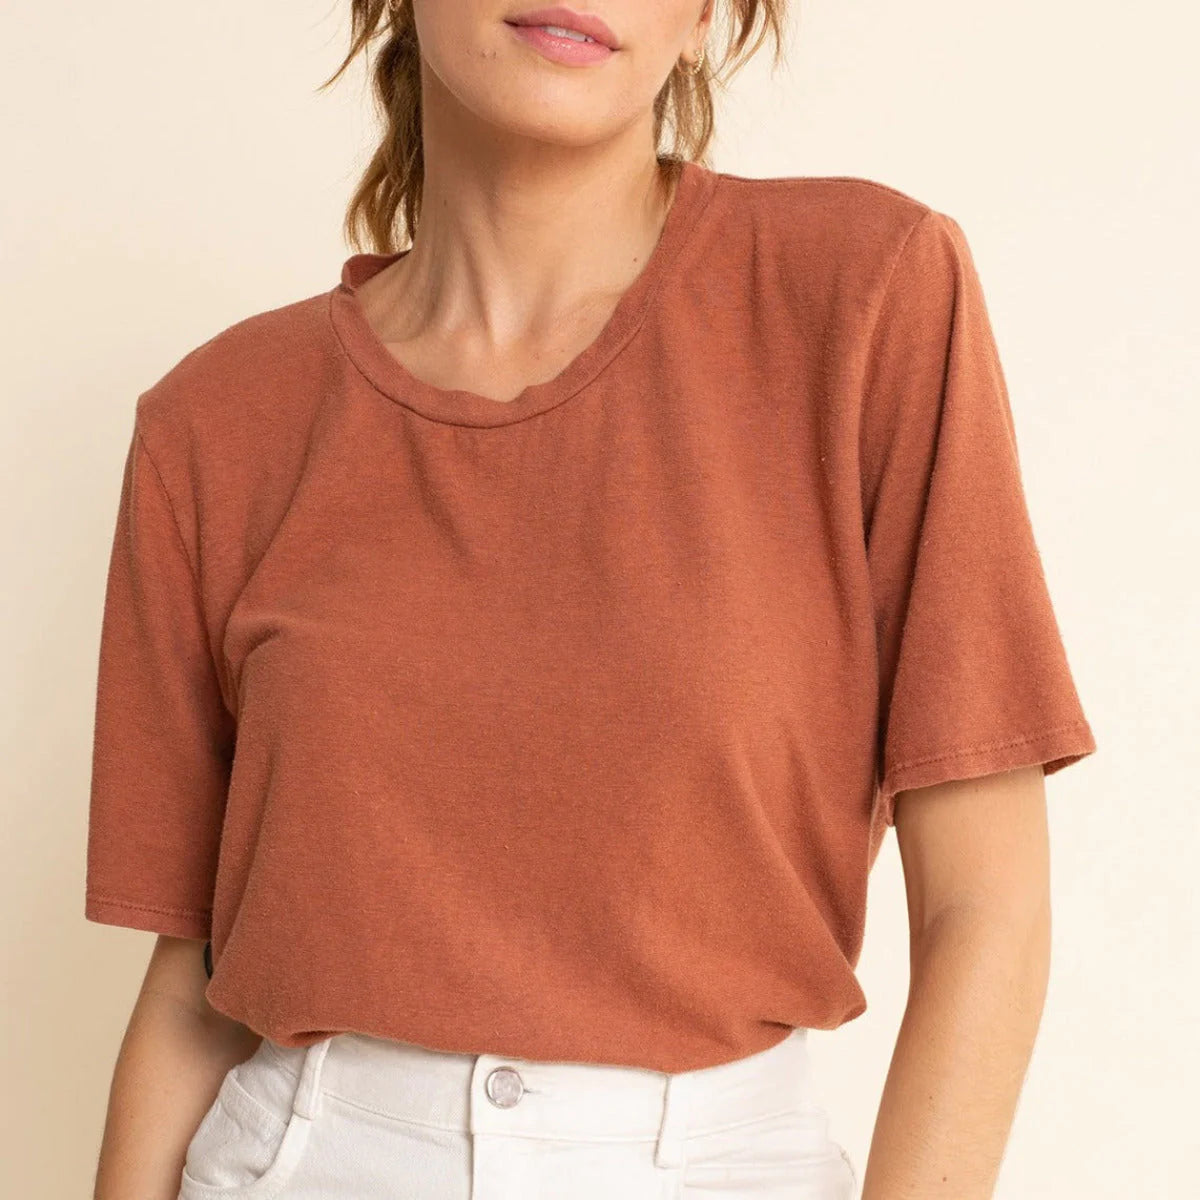 Silverlake Cropped Tee in Coyote By Jungmaven